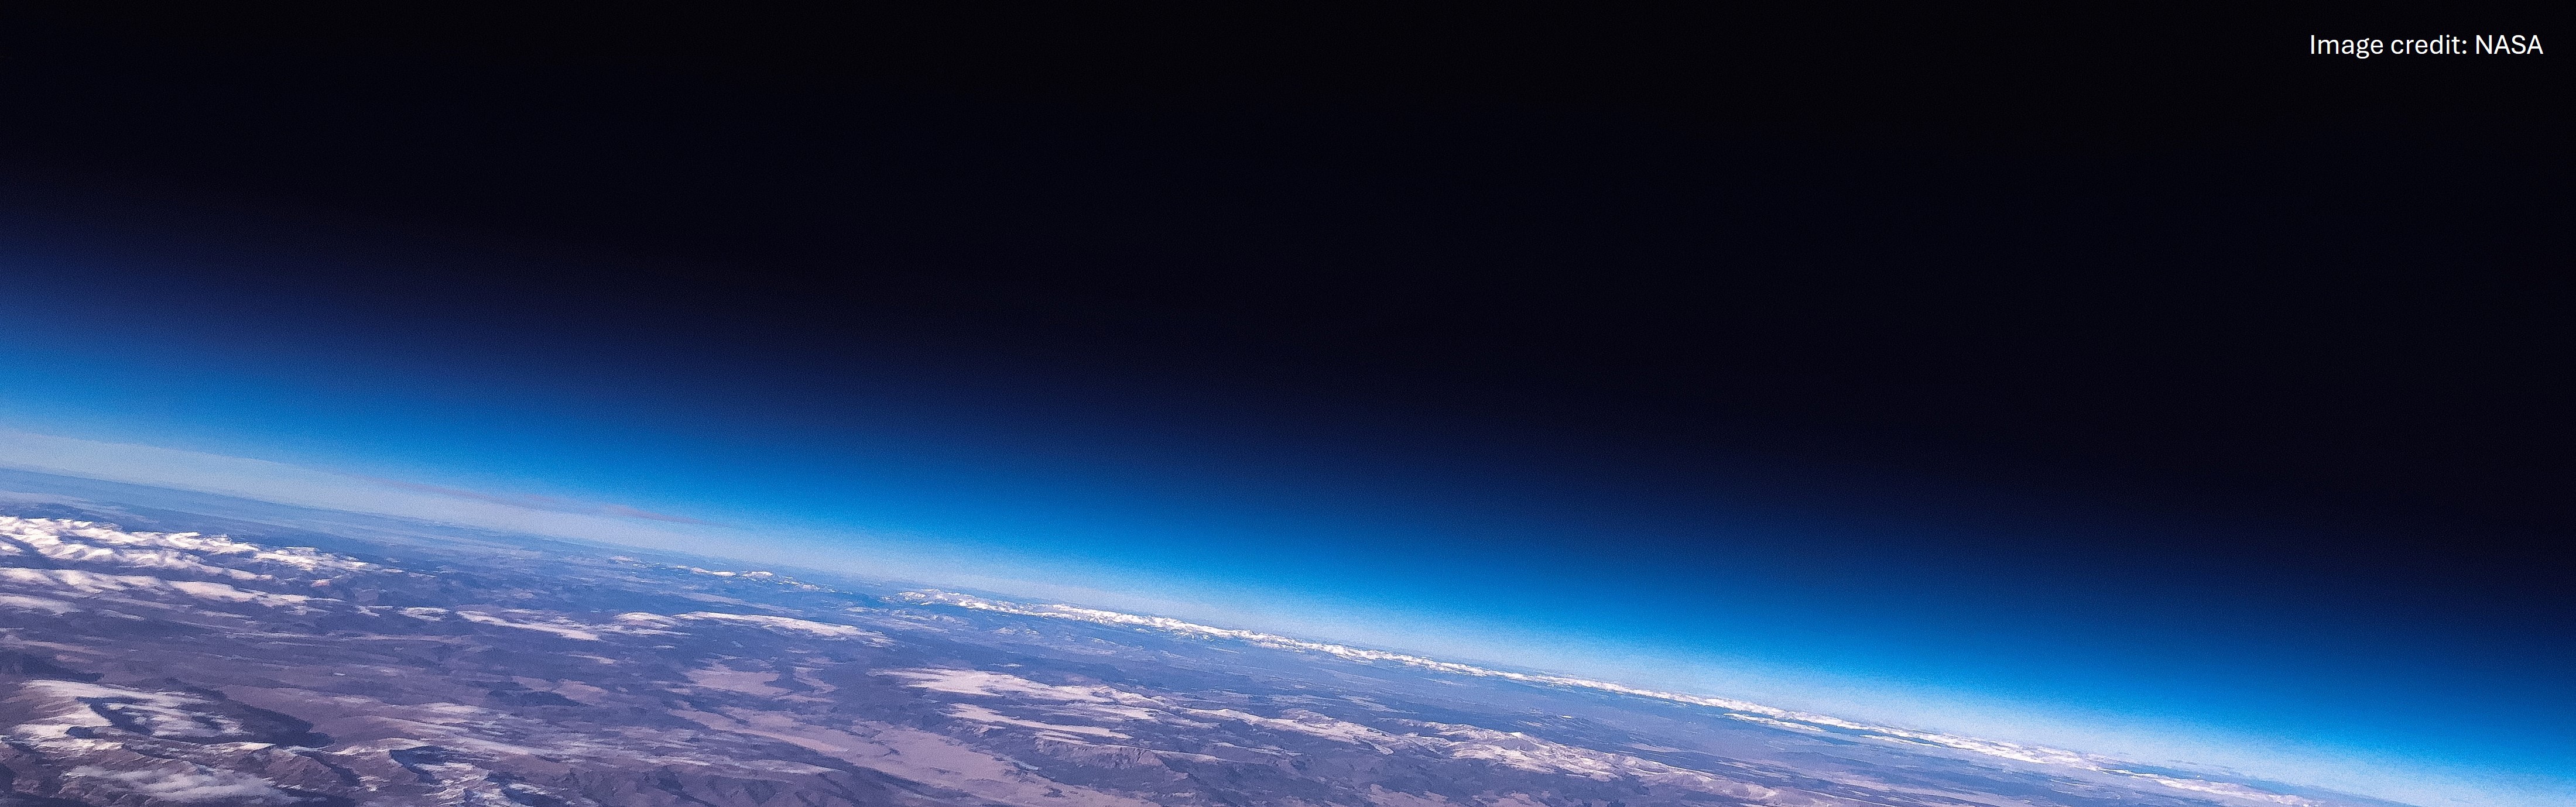 View of Earth's atmosphere from space